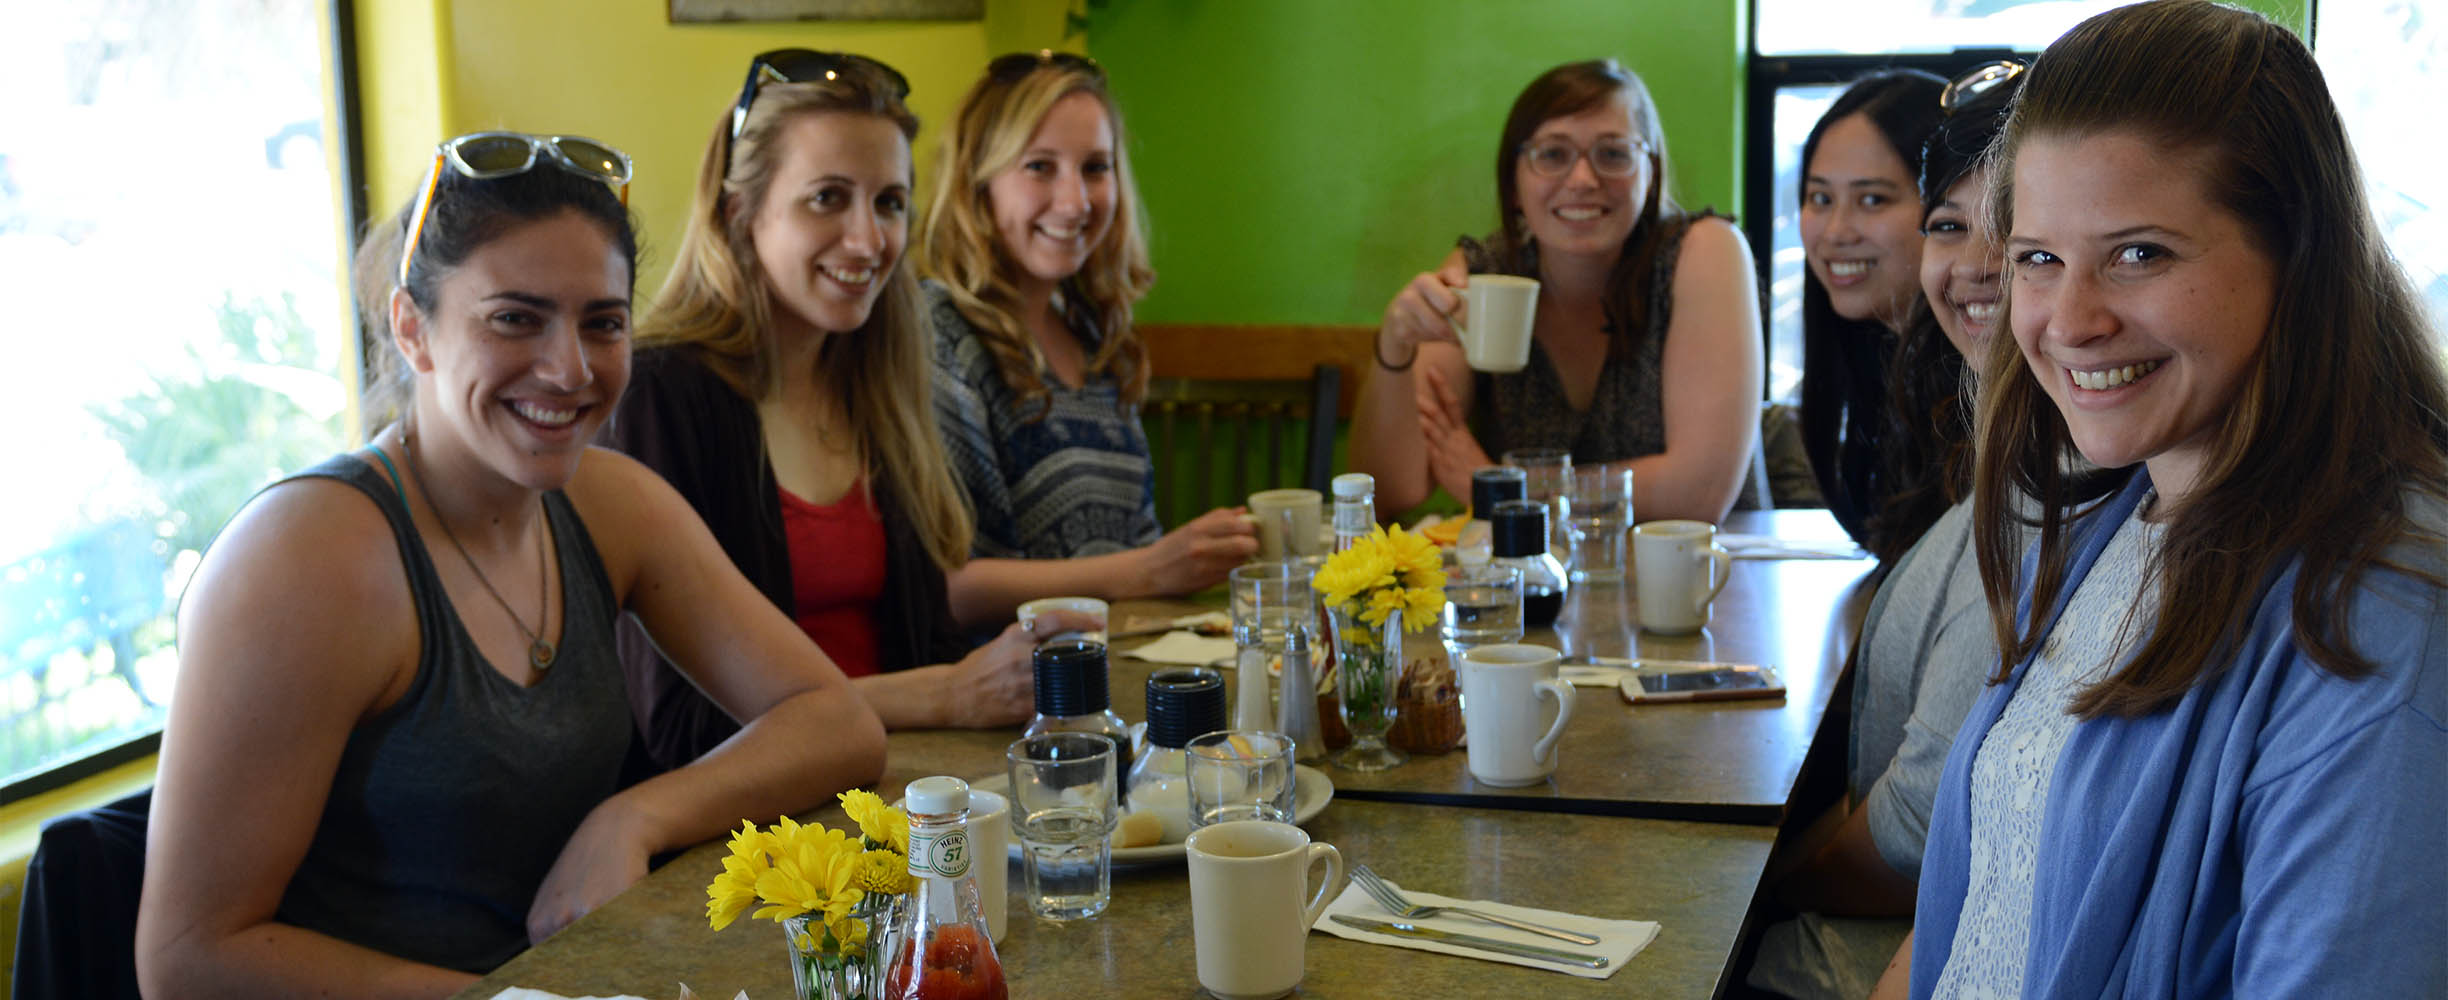 Breakfast and brunch with Brazilian roots and our typical Santa Cruz ambiance and culture lived intensily every day!